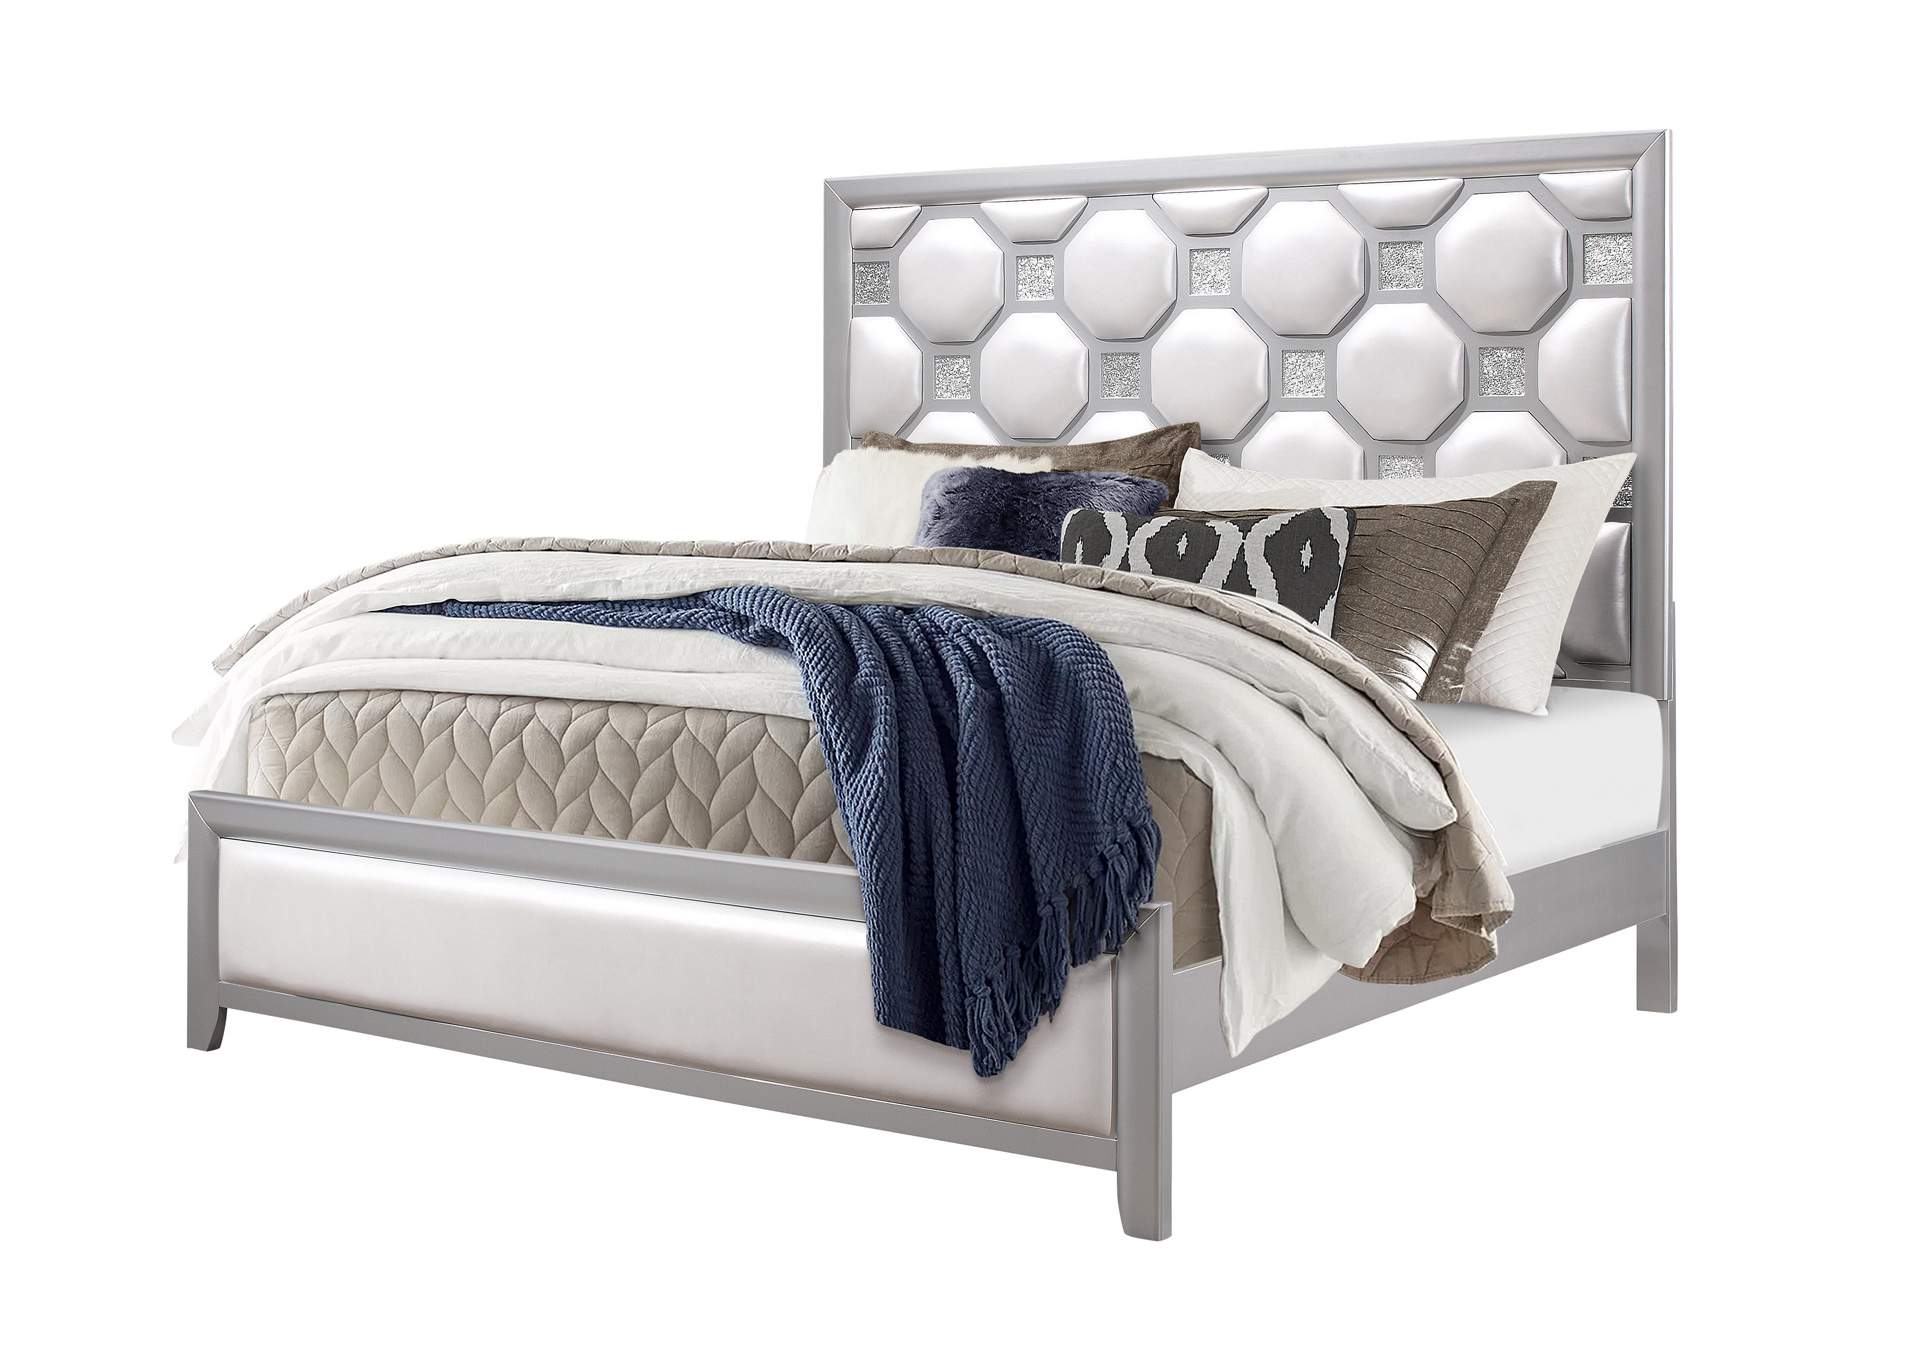 White/Silver Kylie Queen Bed,Global Furniture USA